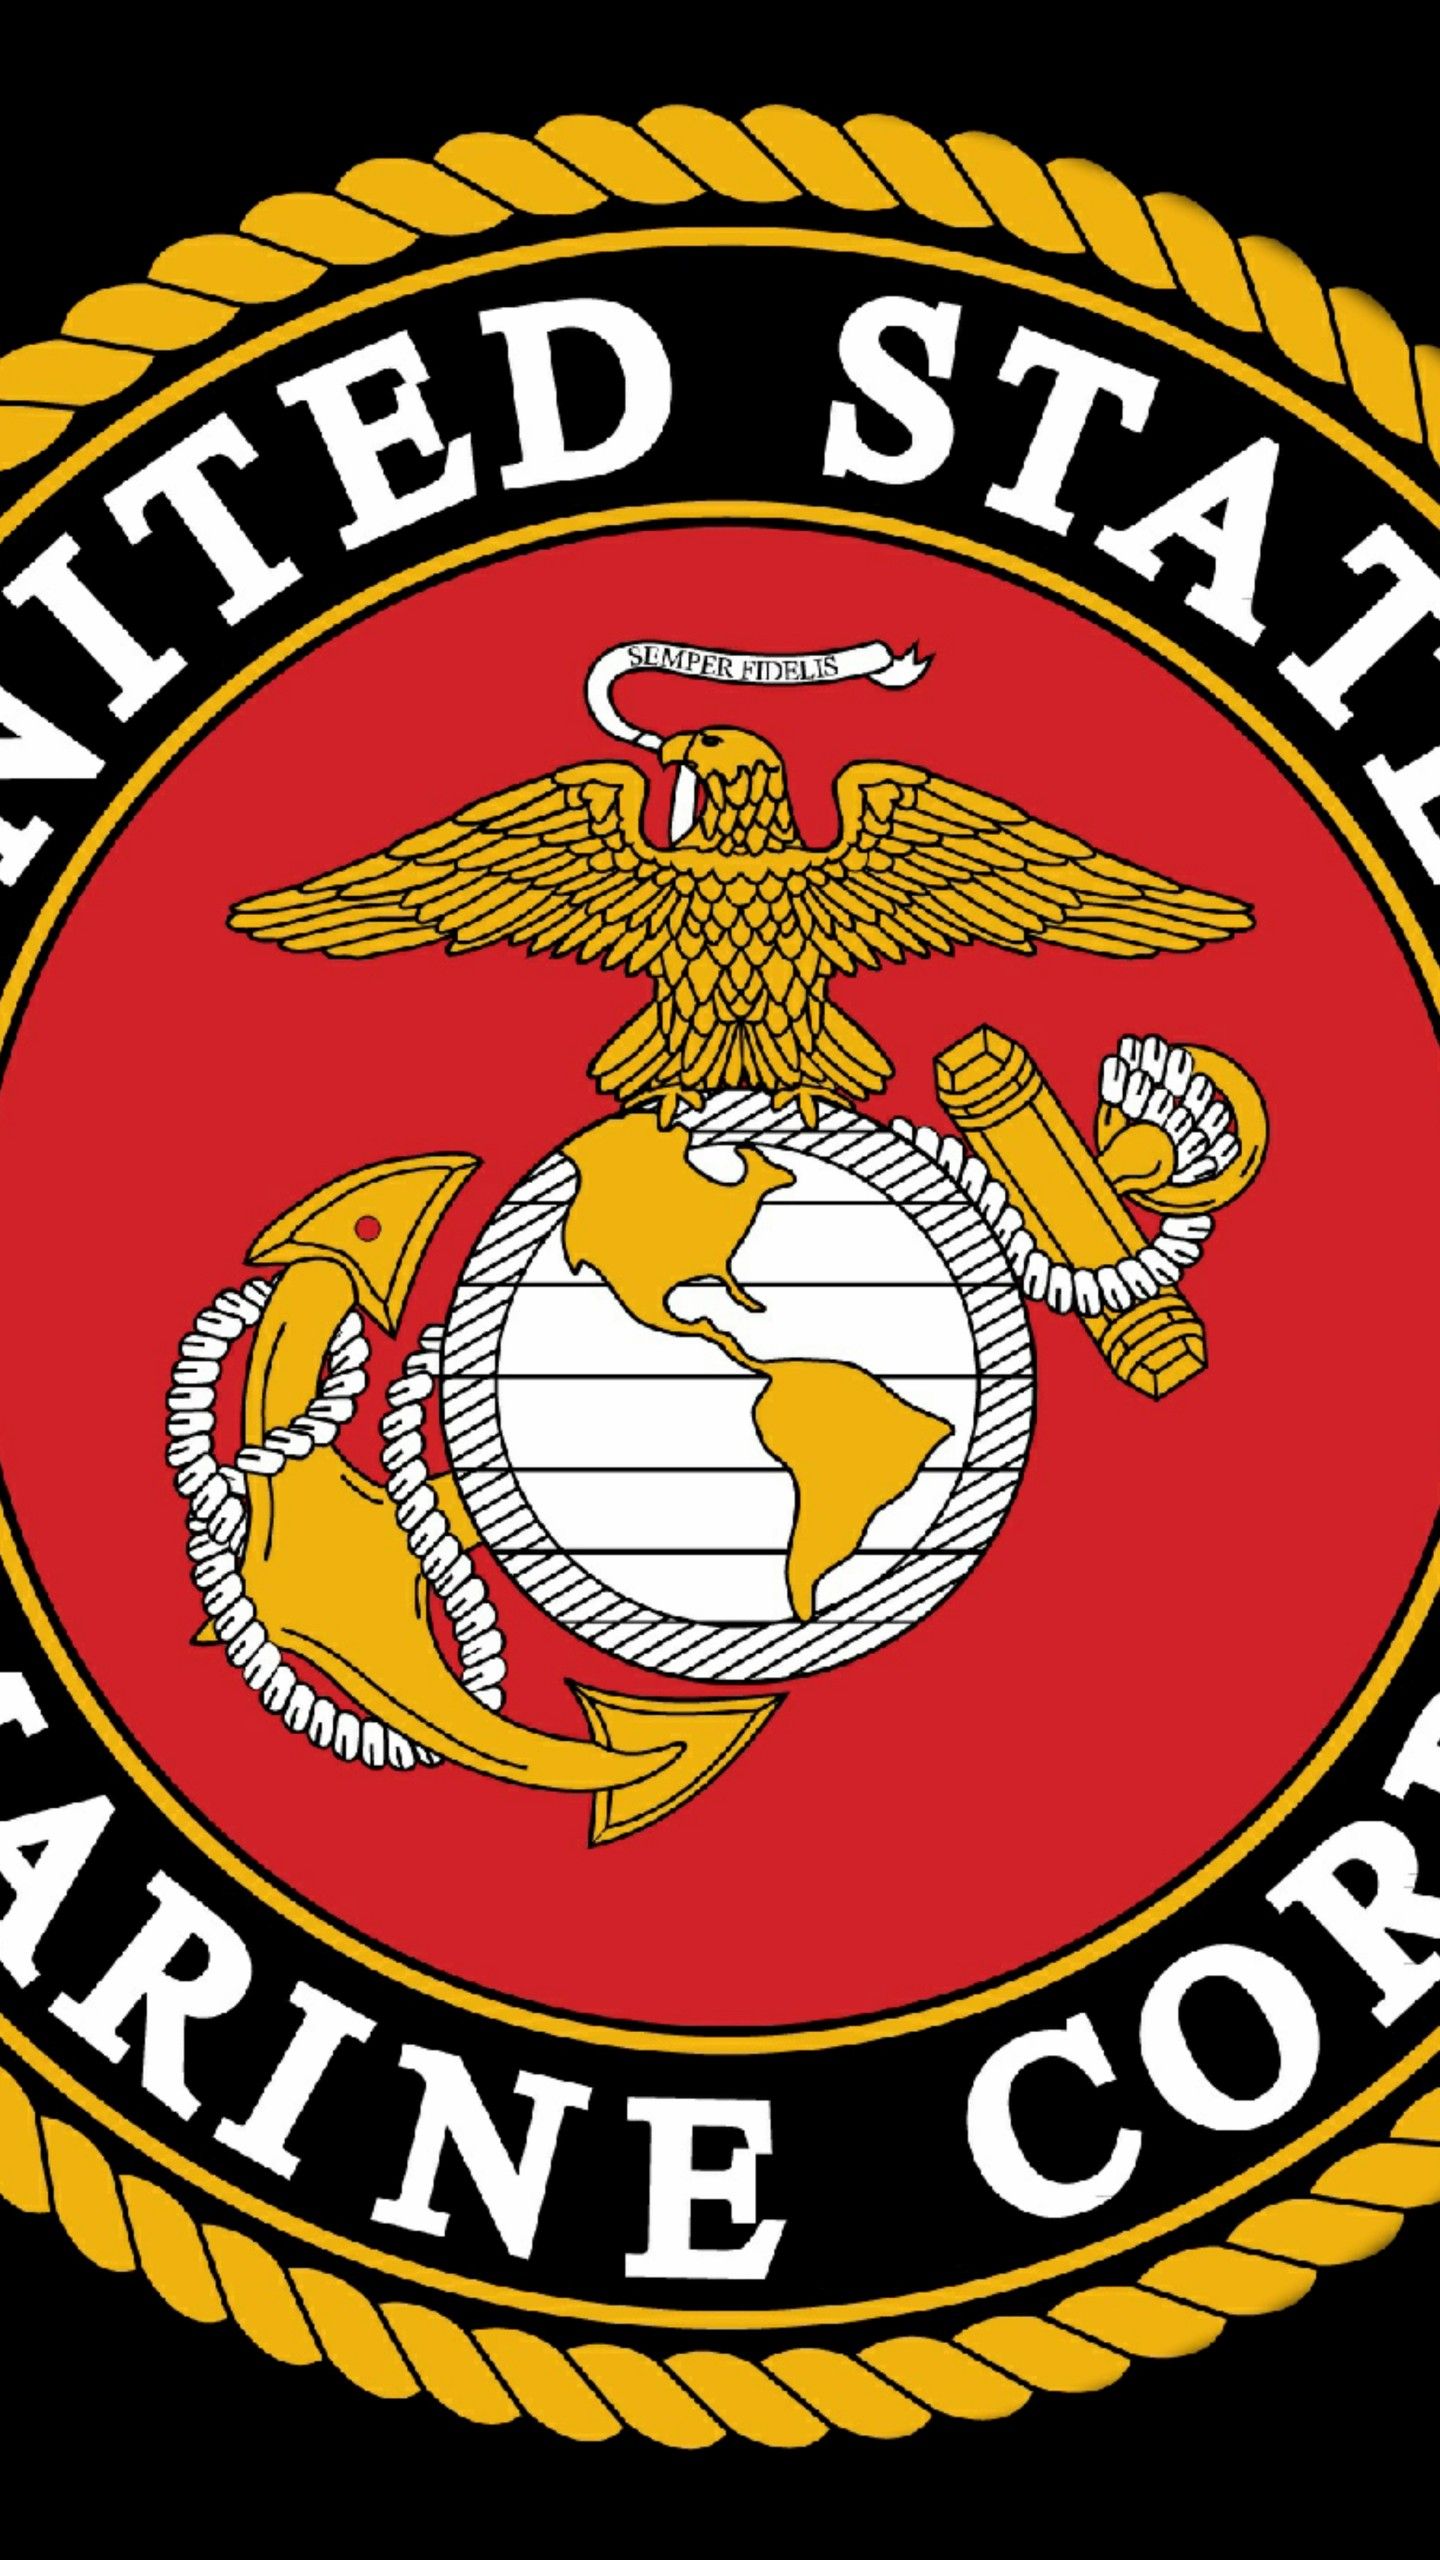 Wallpaper United States Marine Corps, Emblem, Logo, 4K, 8K, Military,. Wallpaper for iPhone, Android, Mobile and Desktop